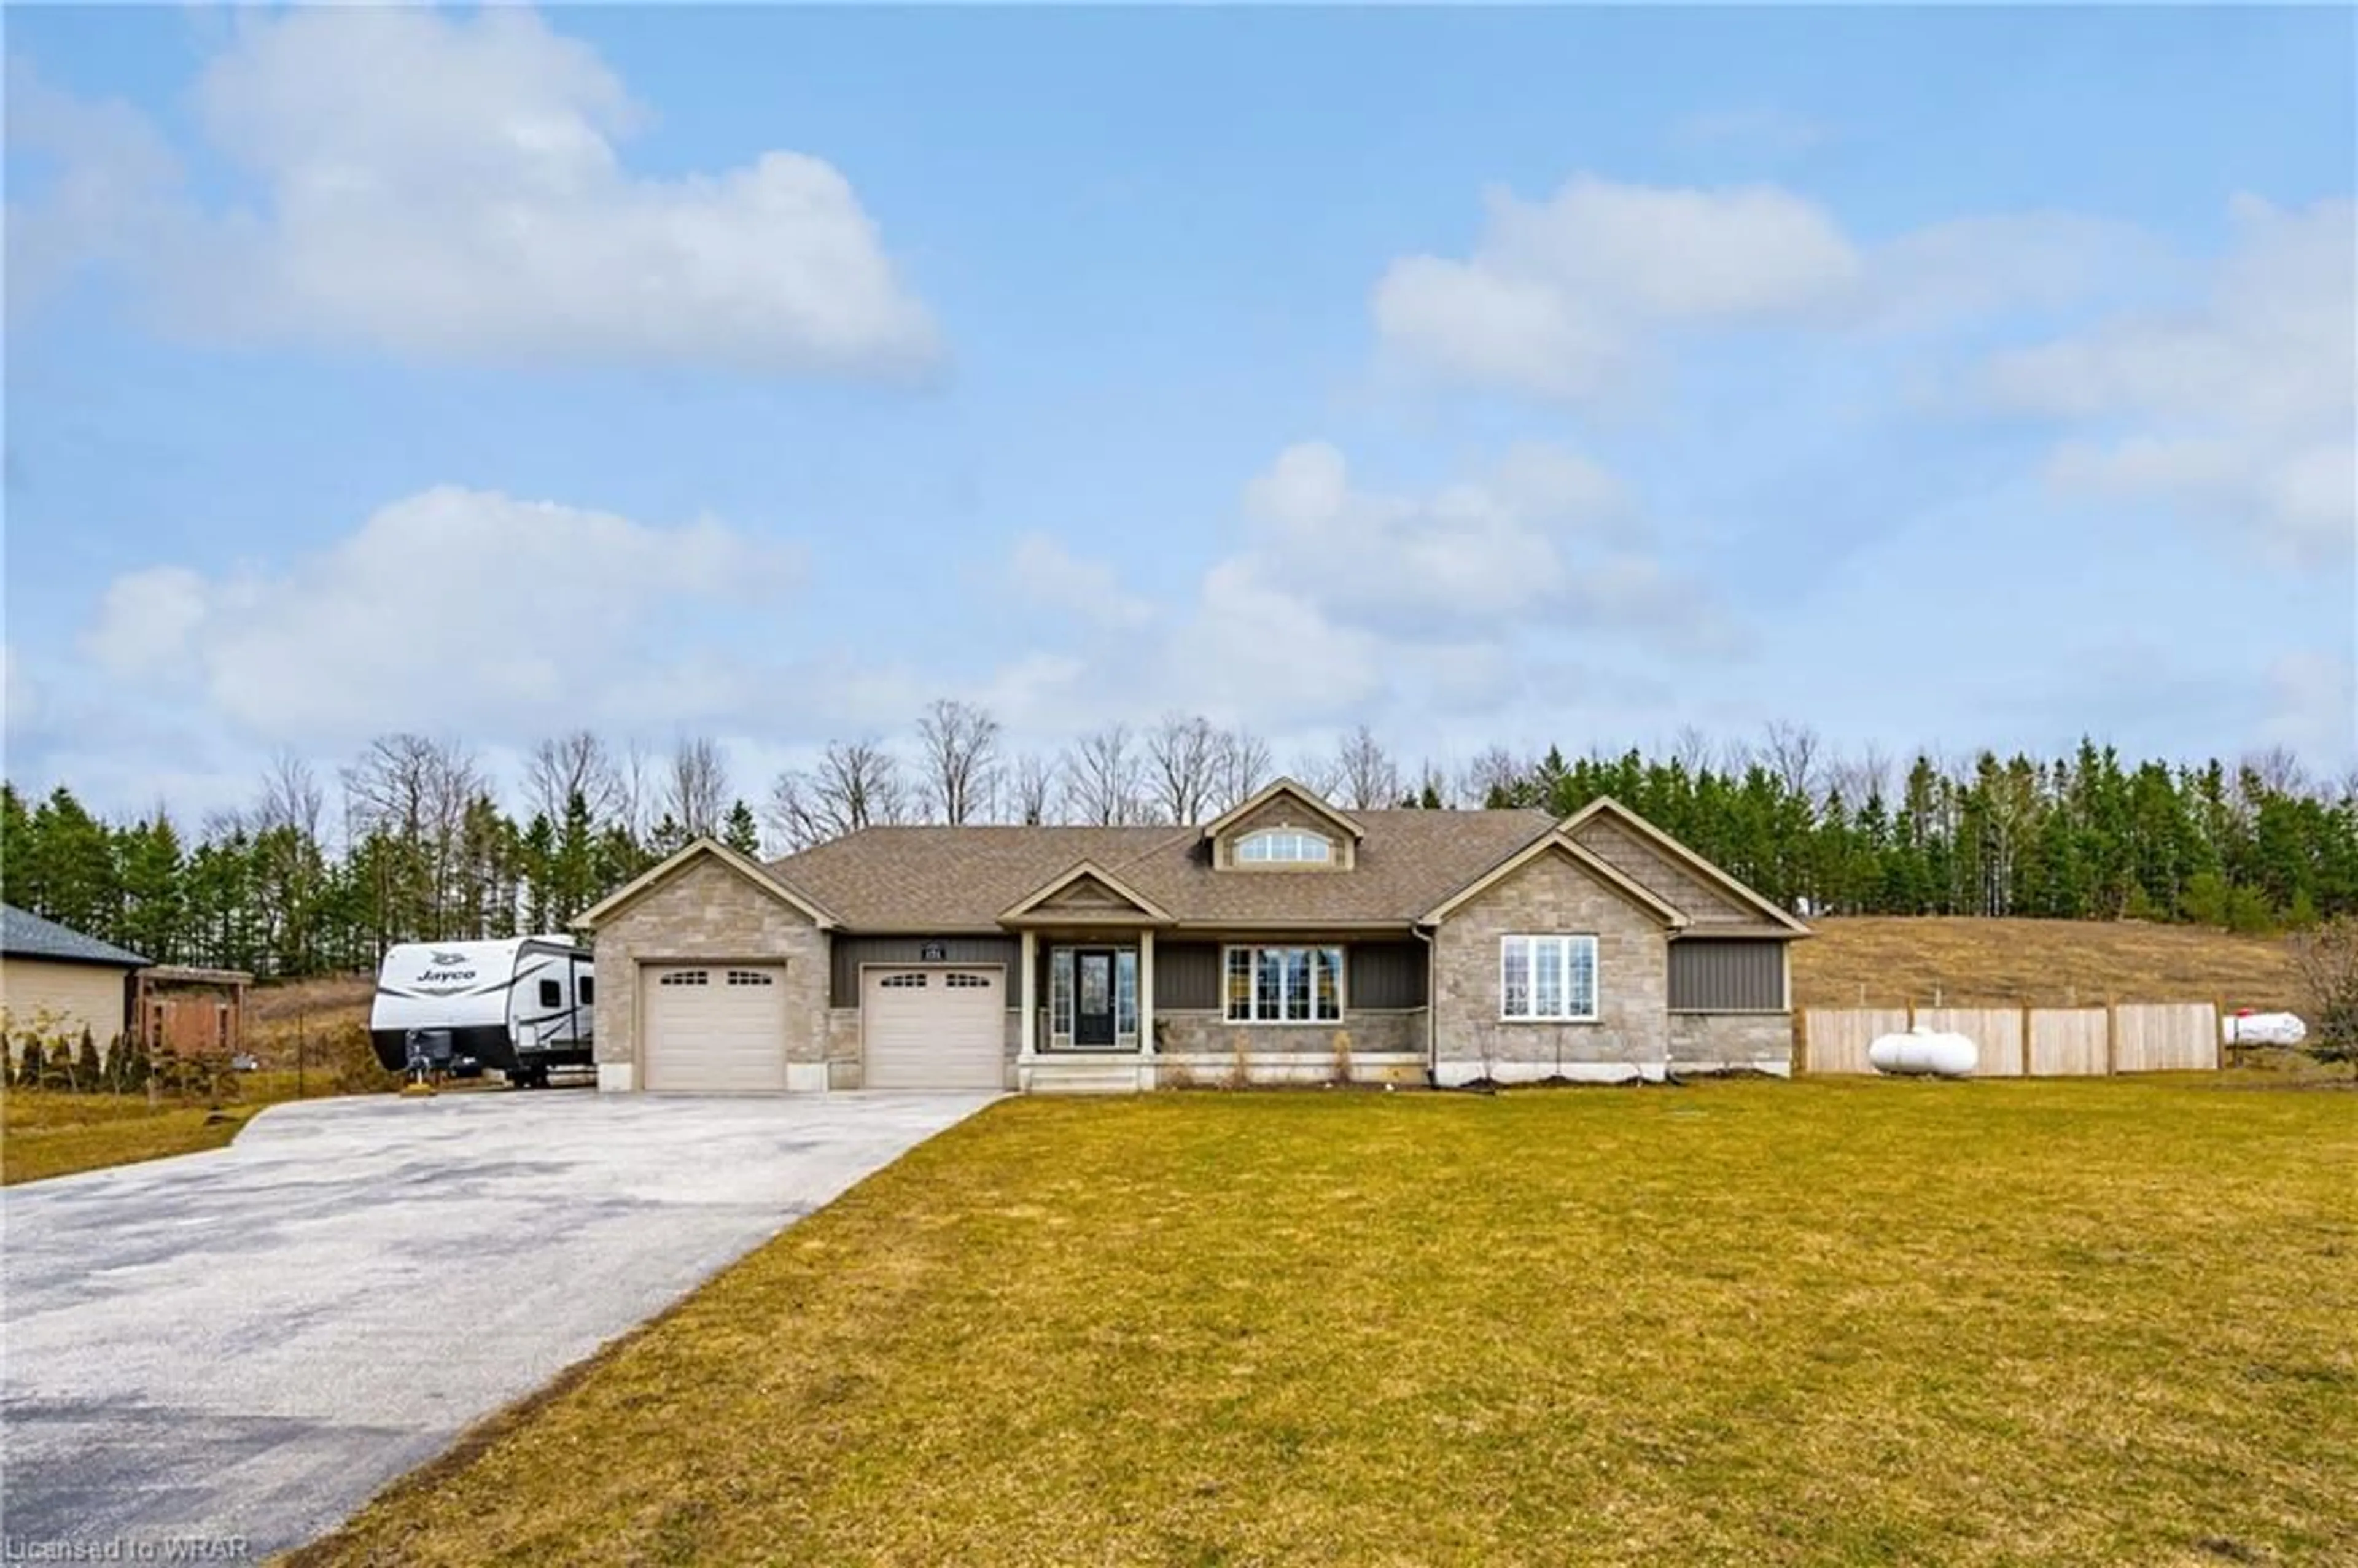 Frontside or backside of a home for 151 Watra Road, R. R. #4 Rd, Southgate Ontario N0G 1R0